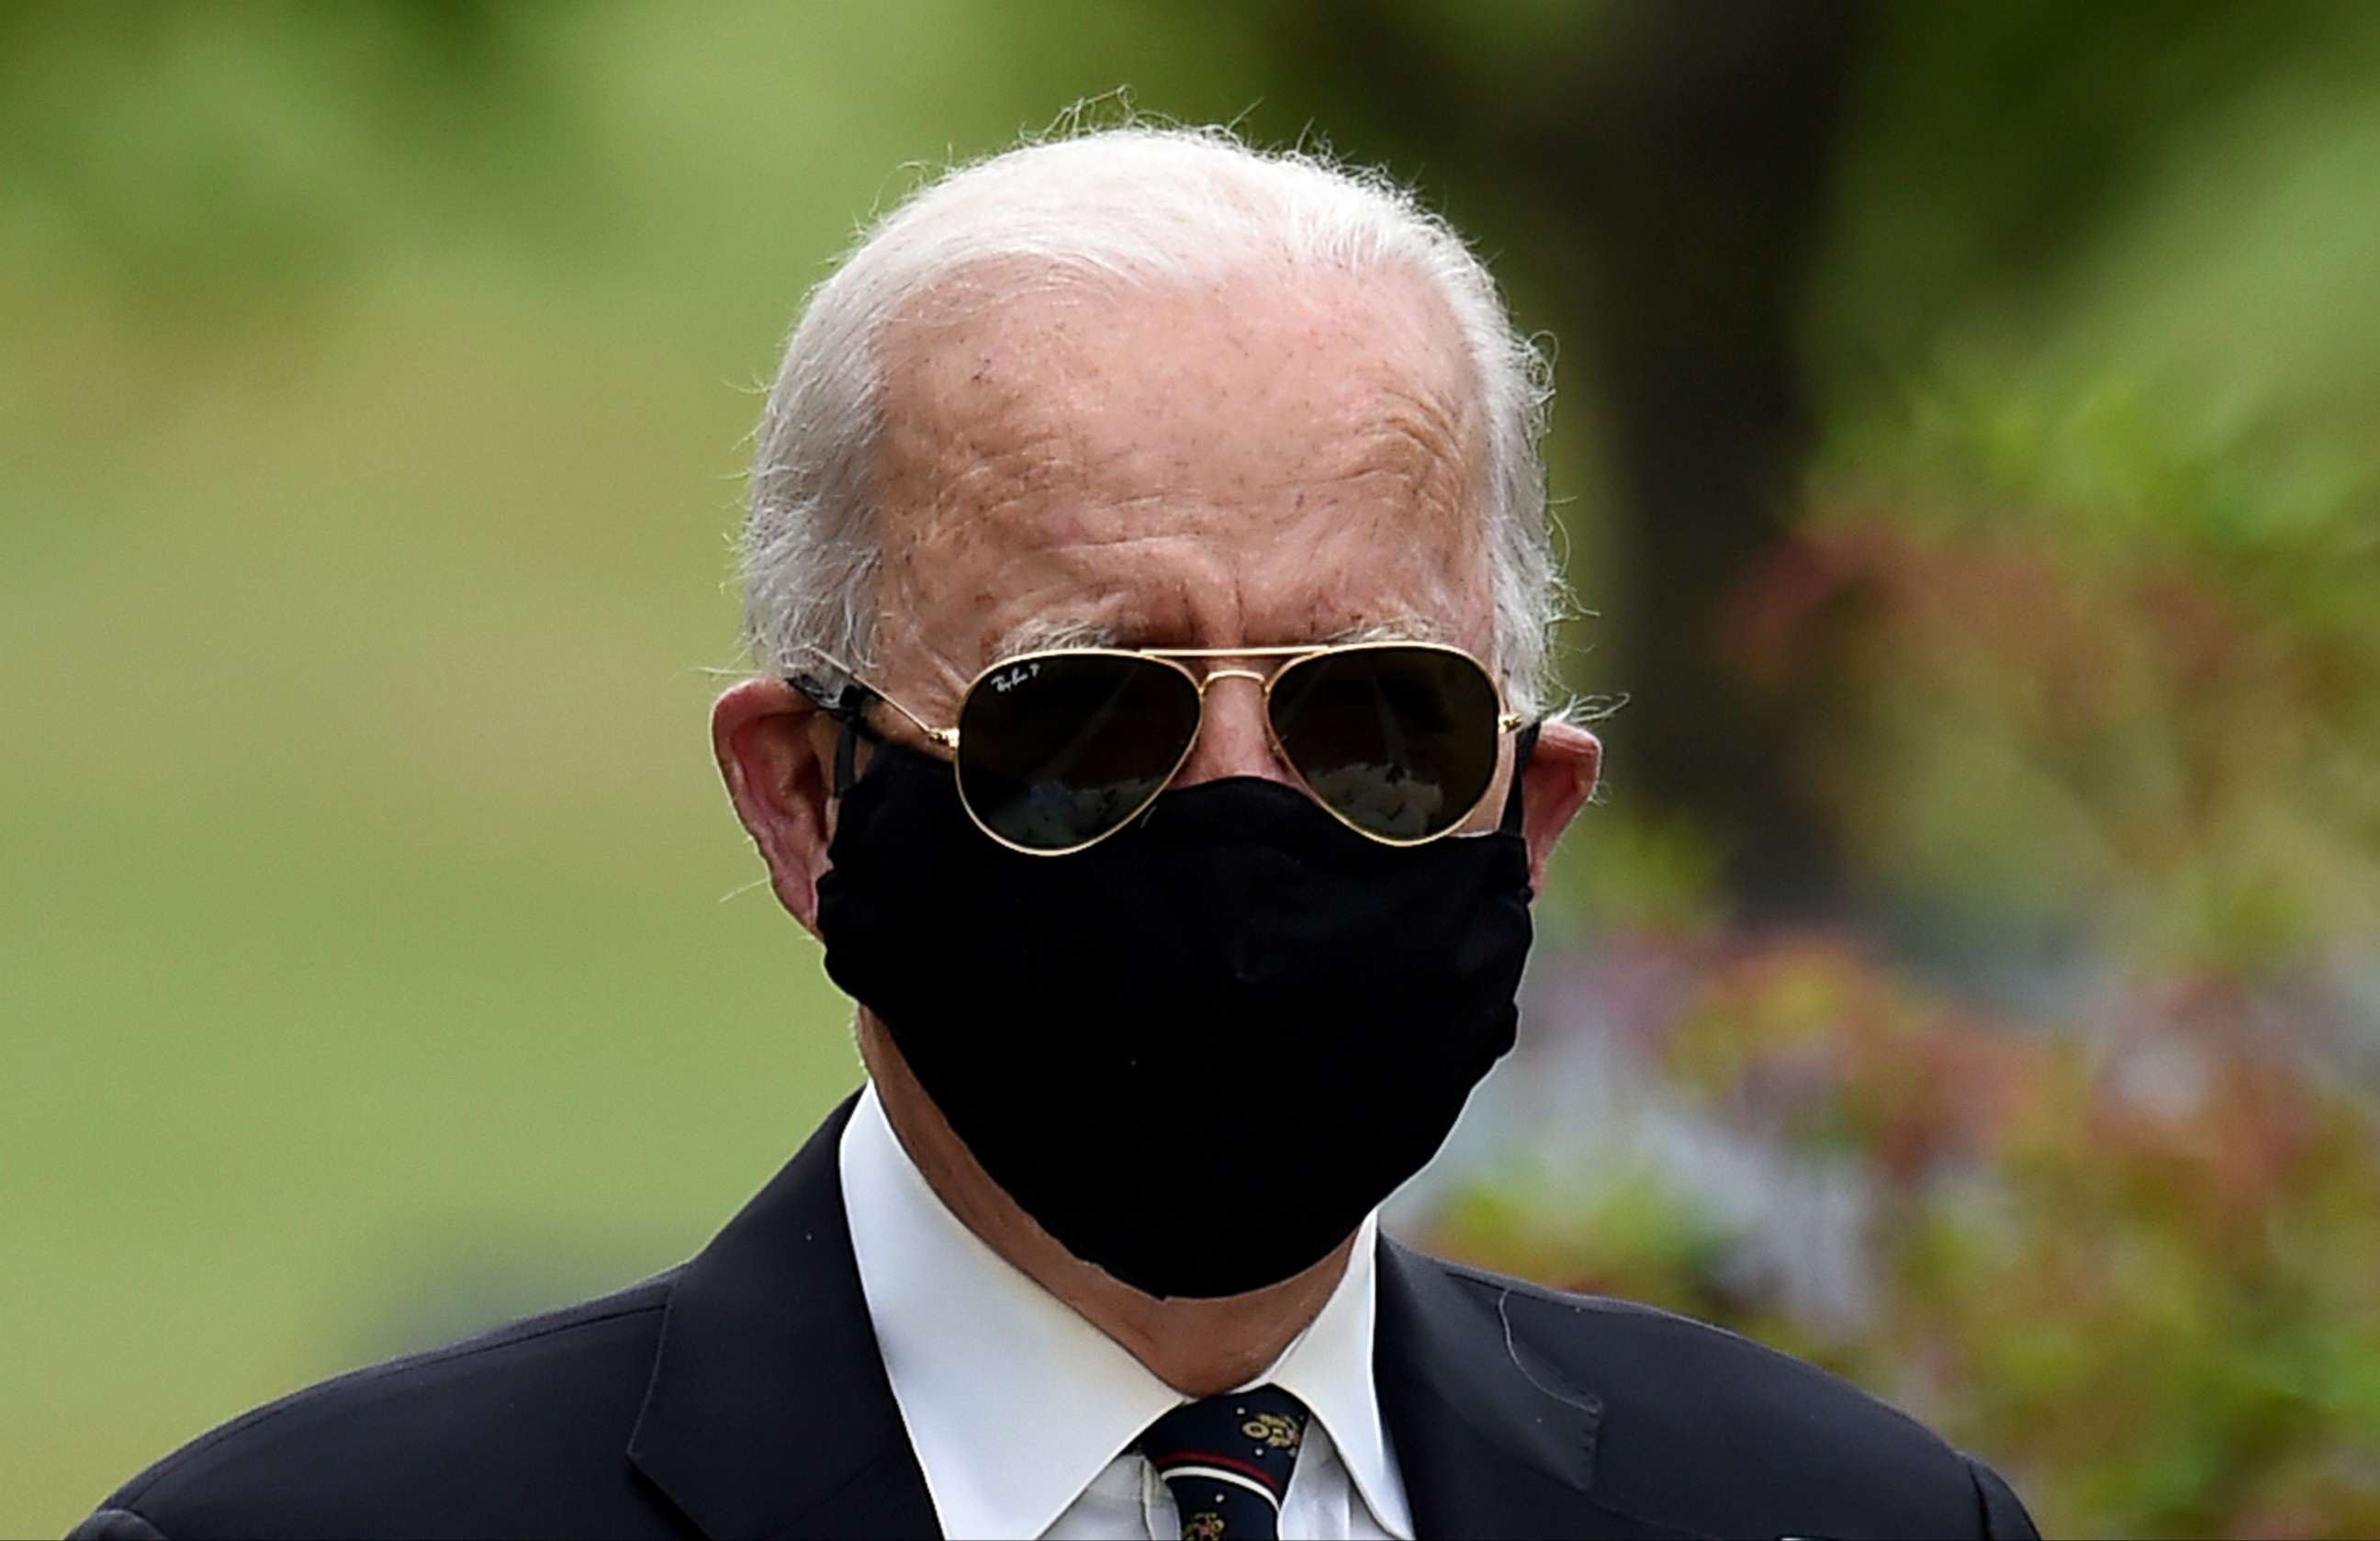 PHOTO: Democratic presidential candidate and former US Vice President Joe Biden arrives to pay his respects to fallen service members on Memorial Day at Delaware Memorial Bridge Veteran's Memorial Park in Newcastle, Del., May 25, 2020.